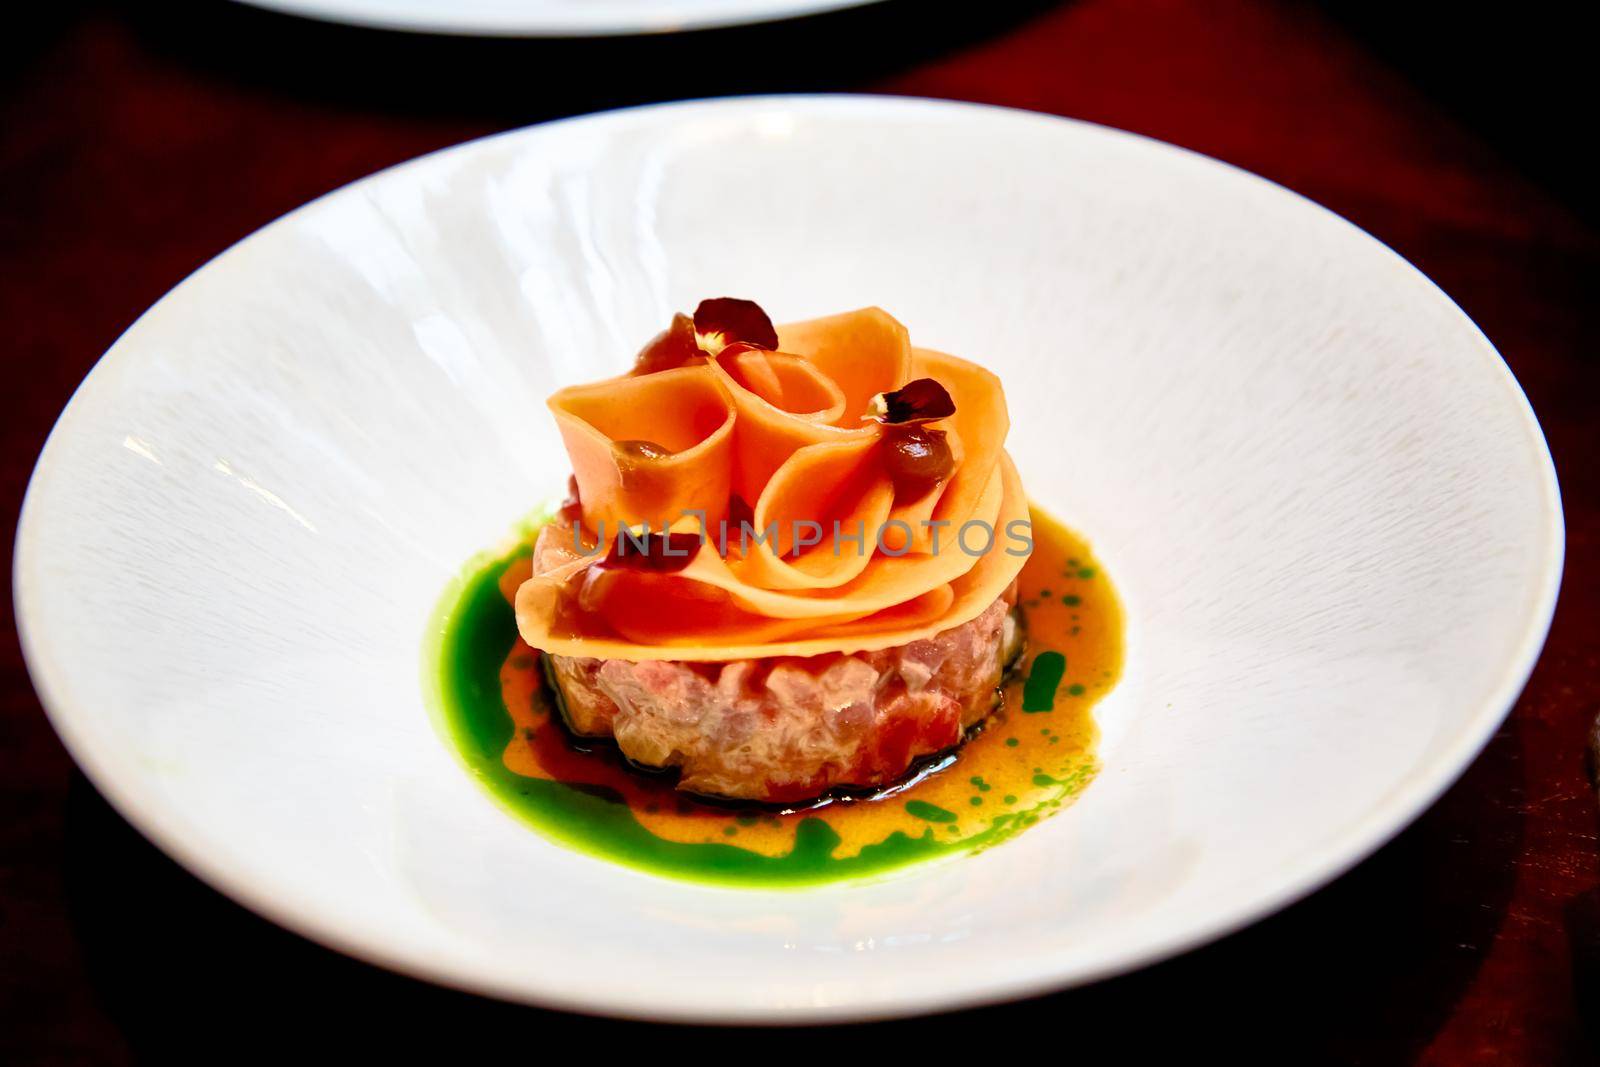 Beef tartare decorated with carrot slices by Milanchikov